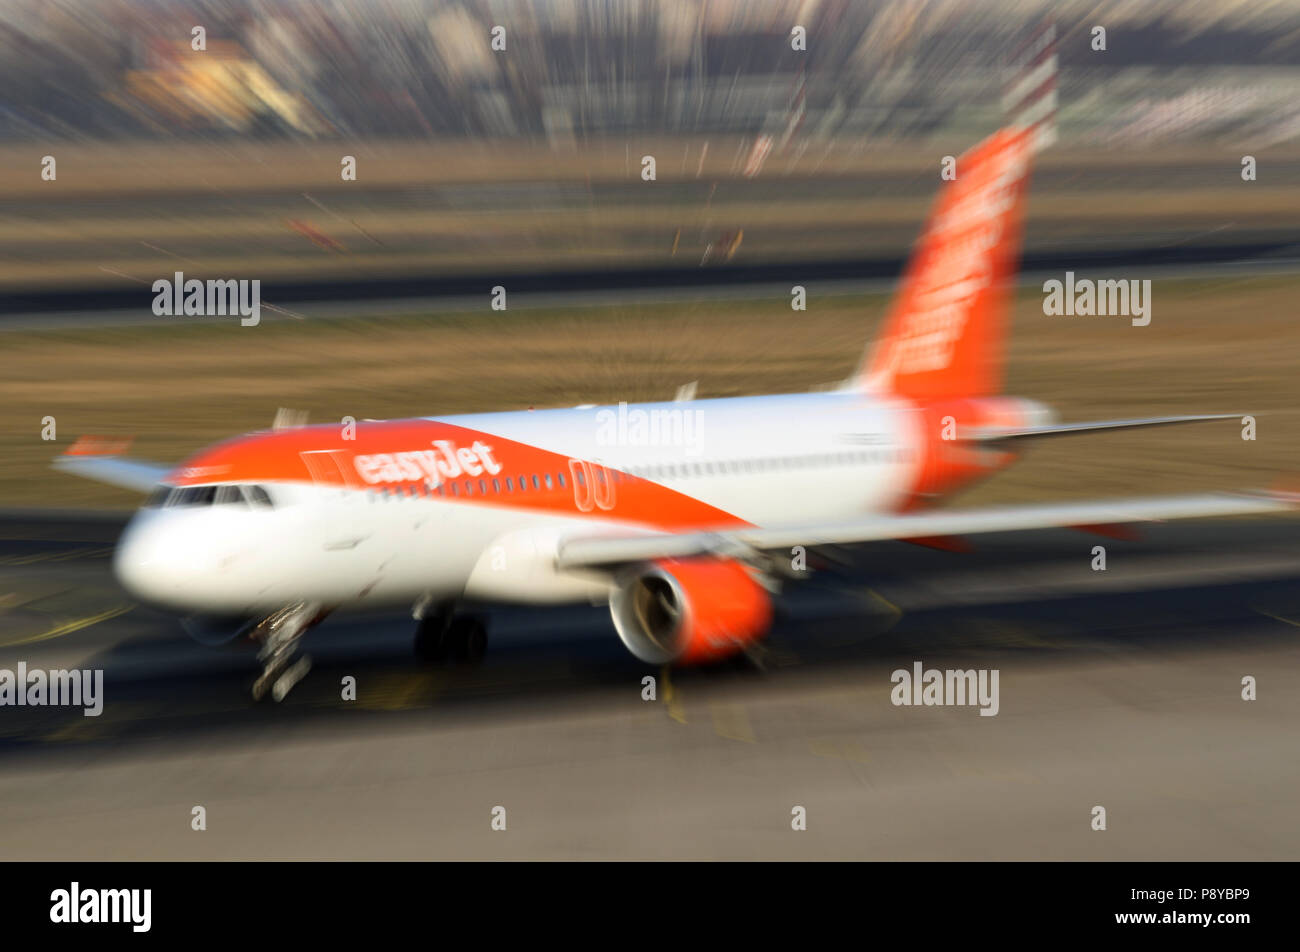 Berlin, Germany, Dynamik, Airbus A320 of the airline easyJet on the apron of the airport Berlin-Tegel Stock Photo